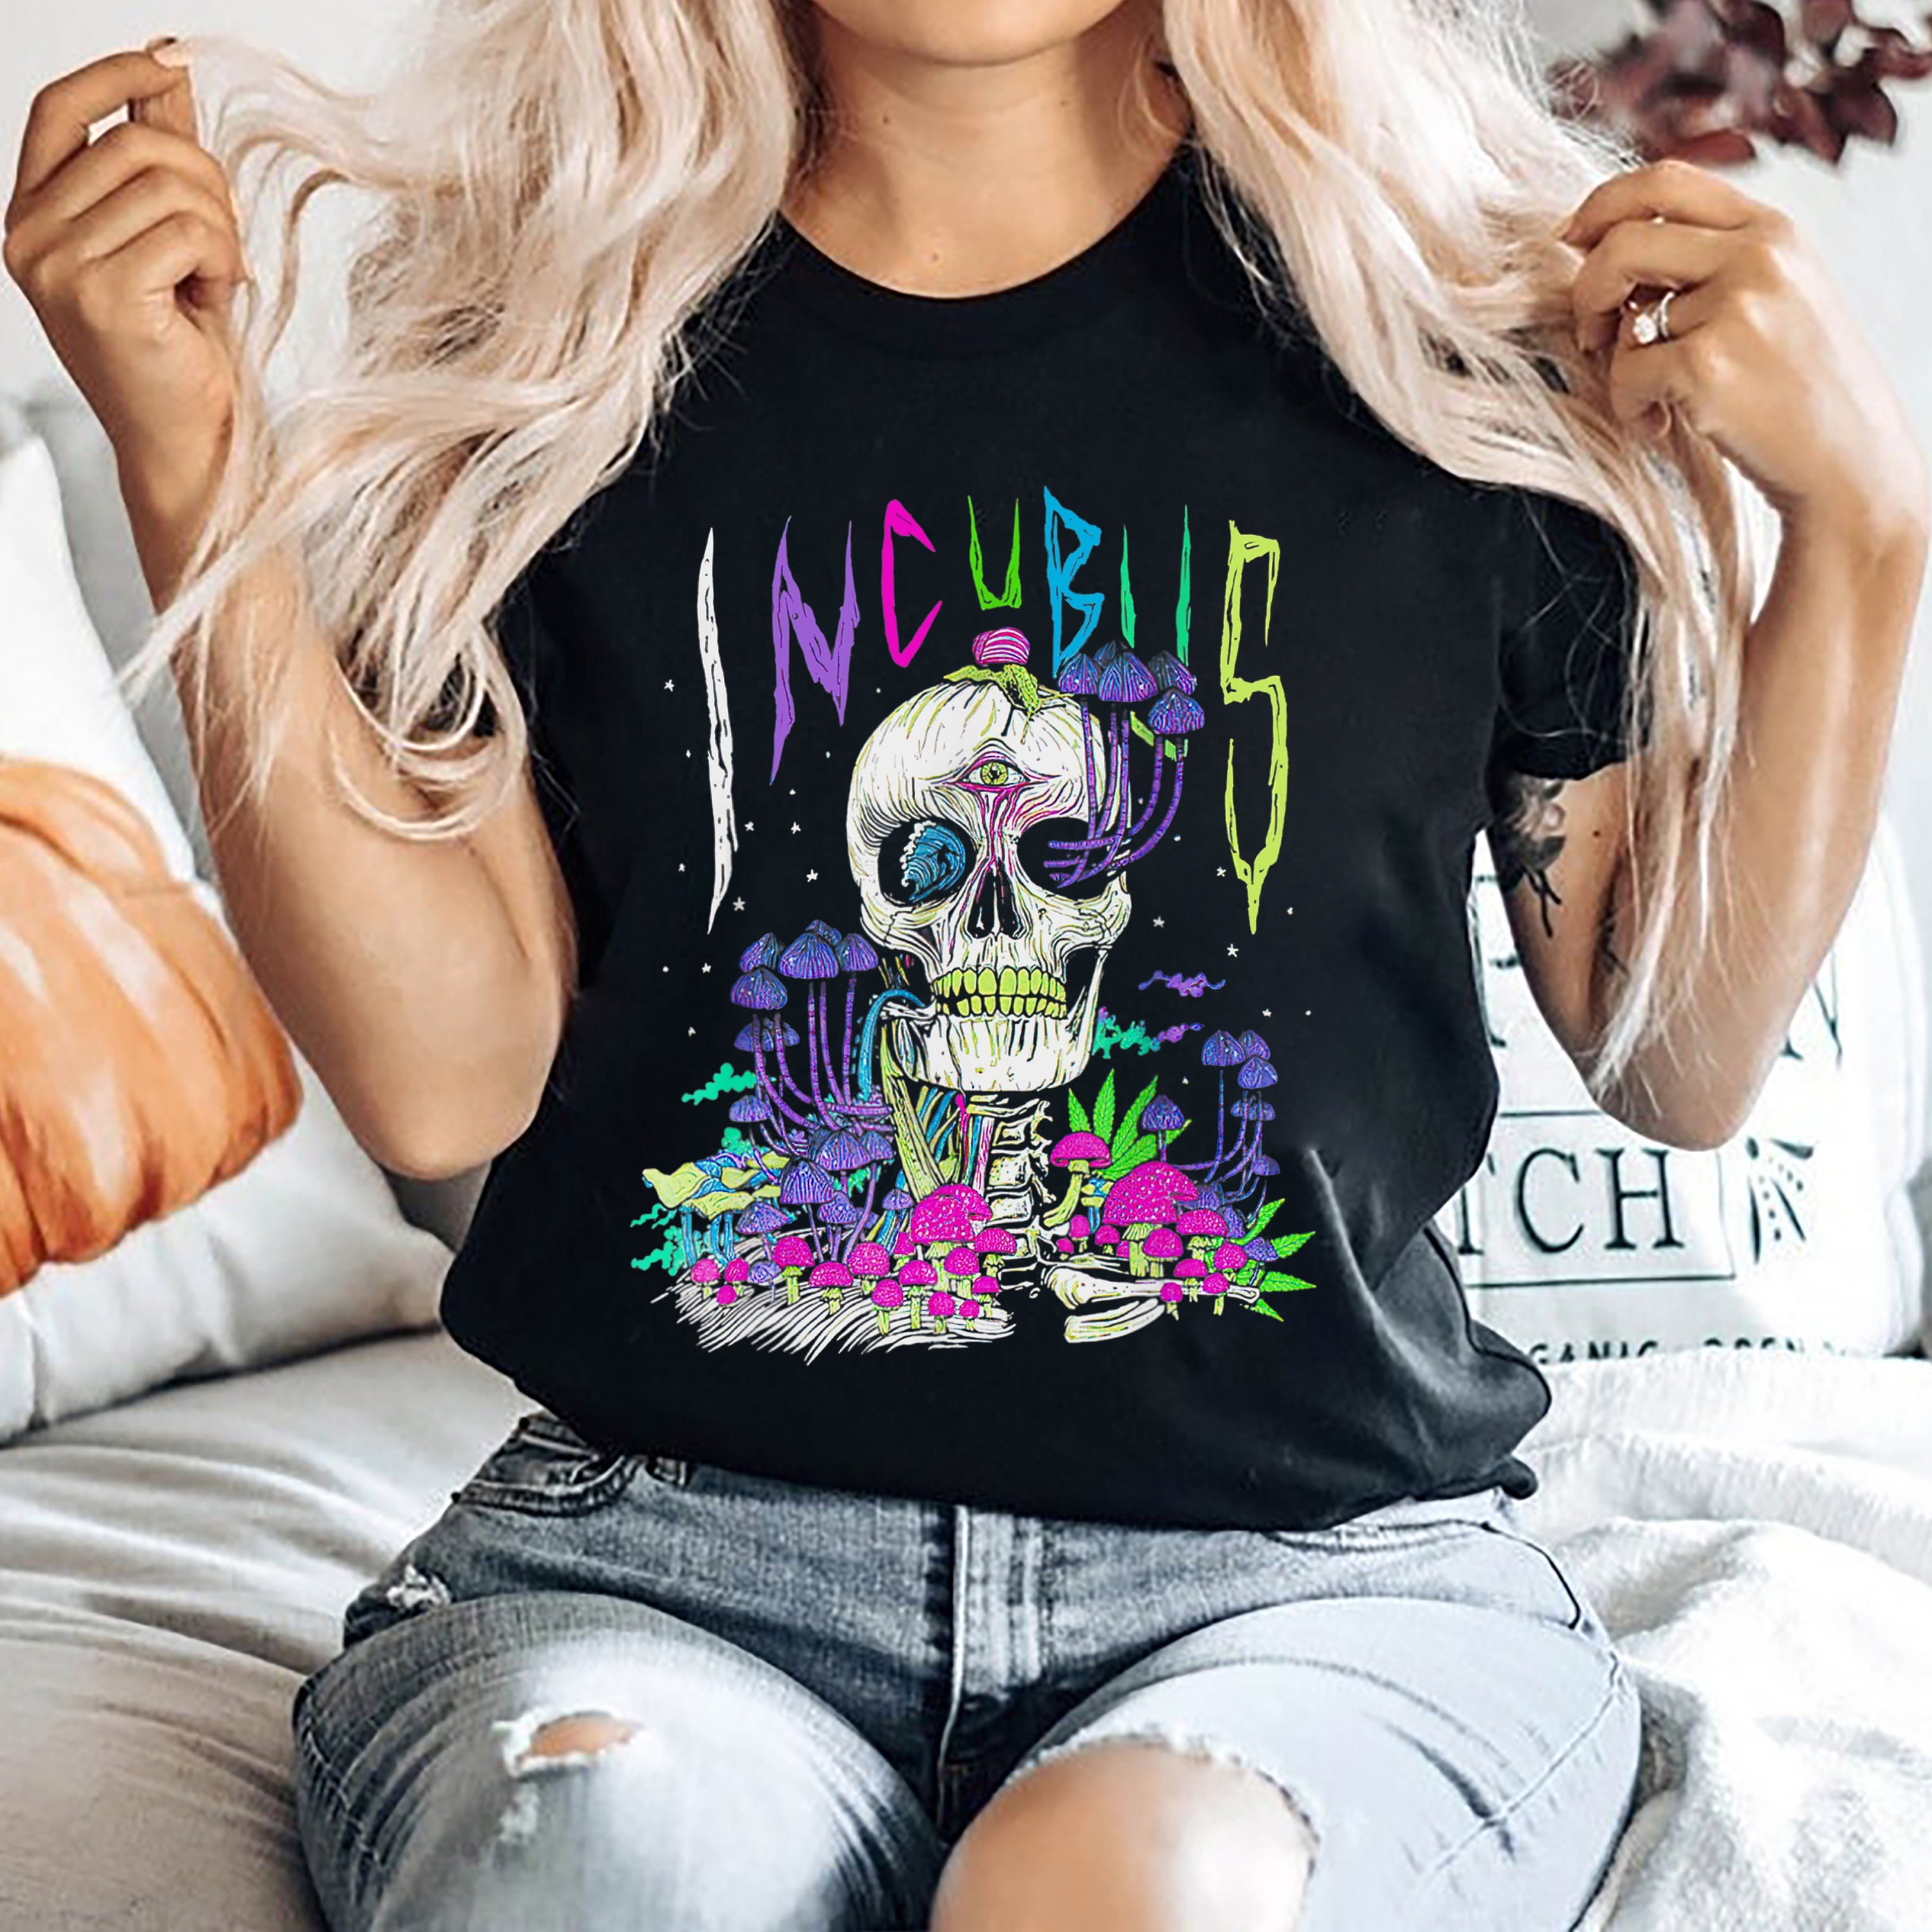 Discover A Crow Left Skull Morning And Flower Incubus T-shirt, Incubus Vintage Shirt